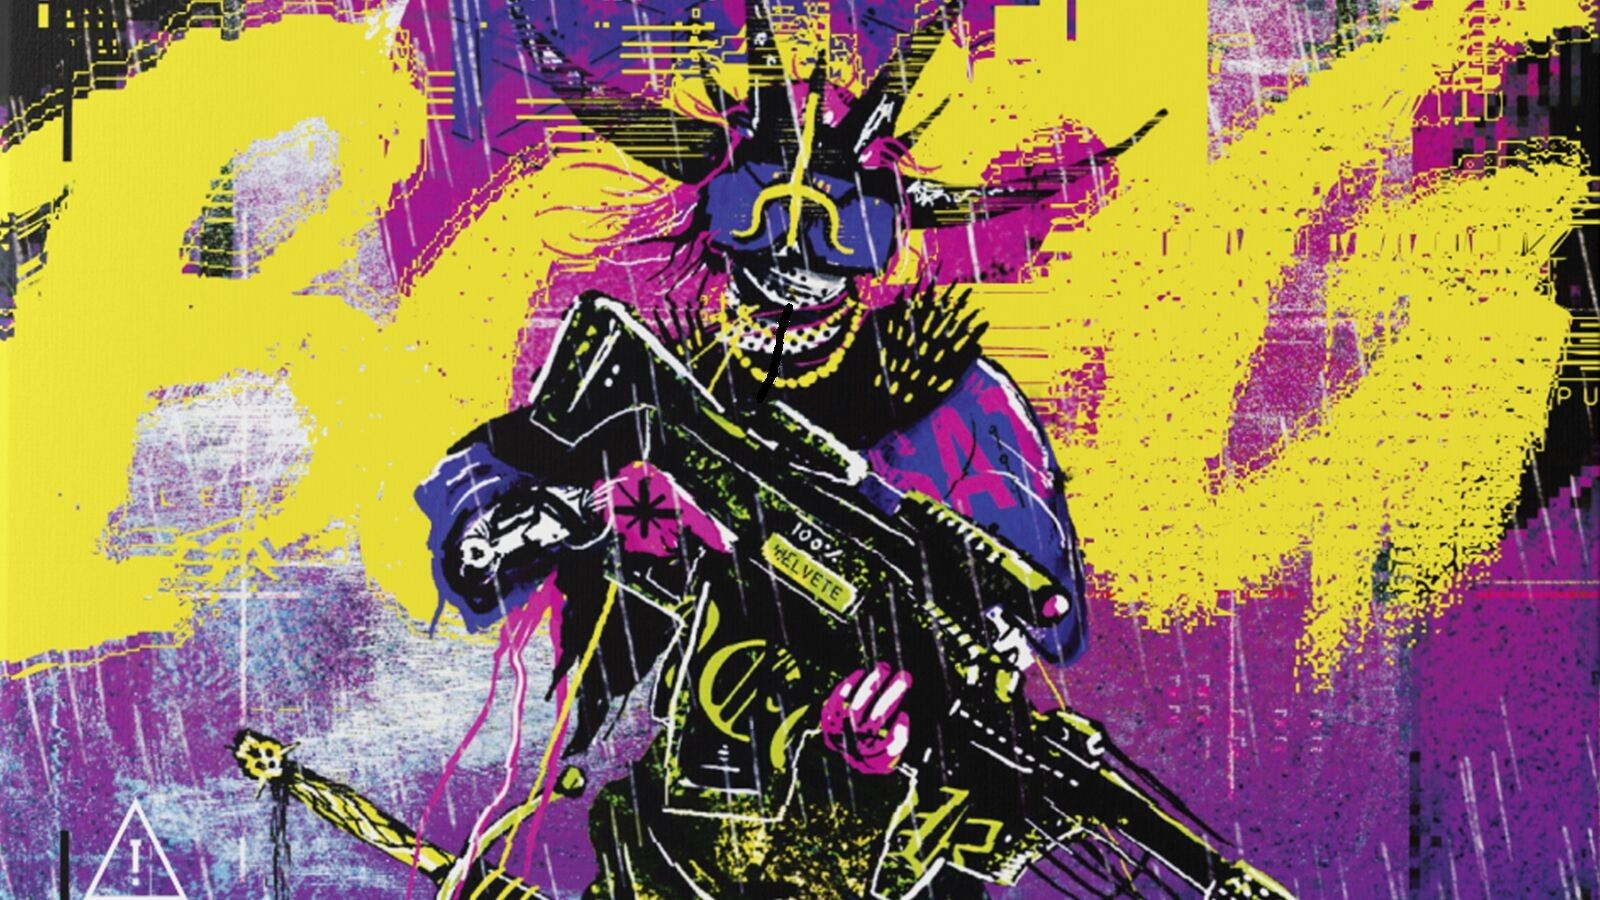 Cy_Borg Art with bright purple and yellow colors showing a stylized cyberpunk character holding a gun.